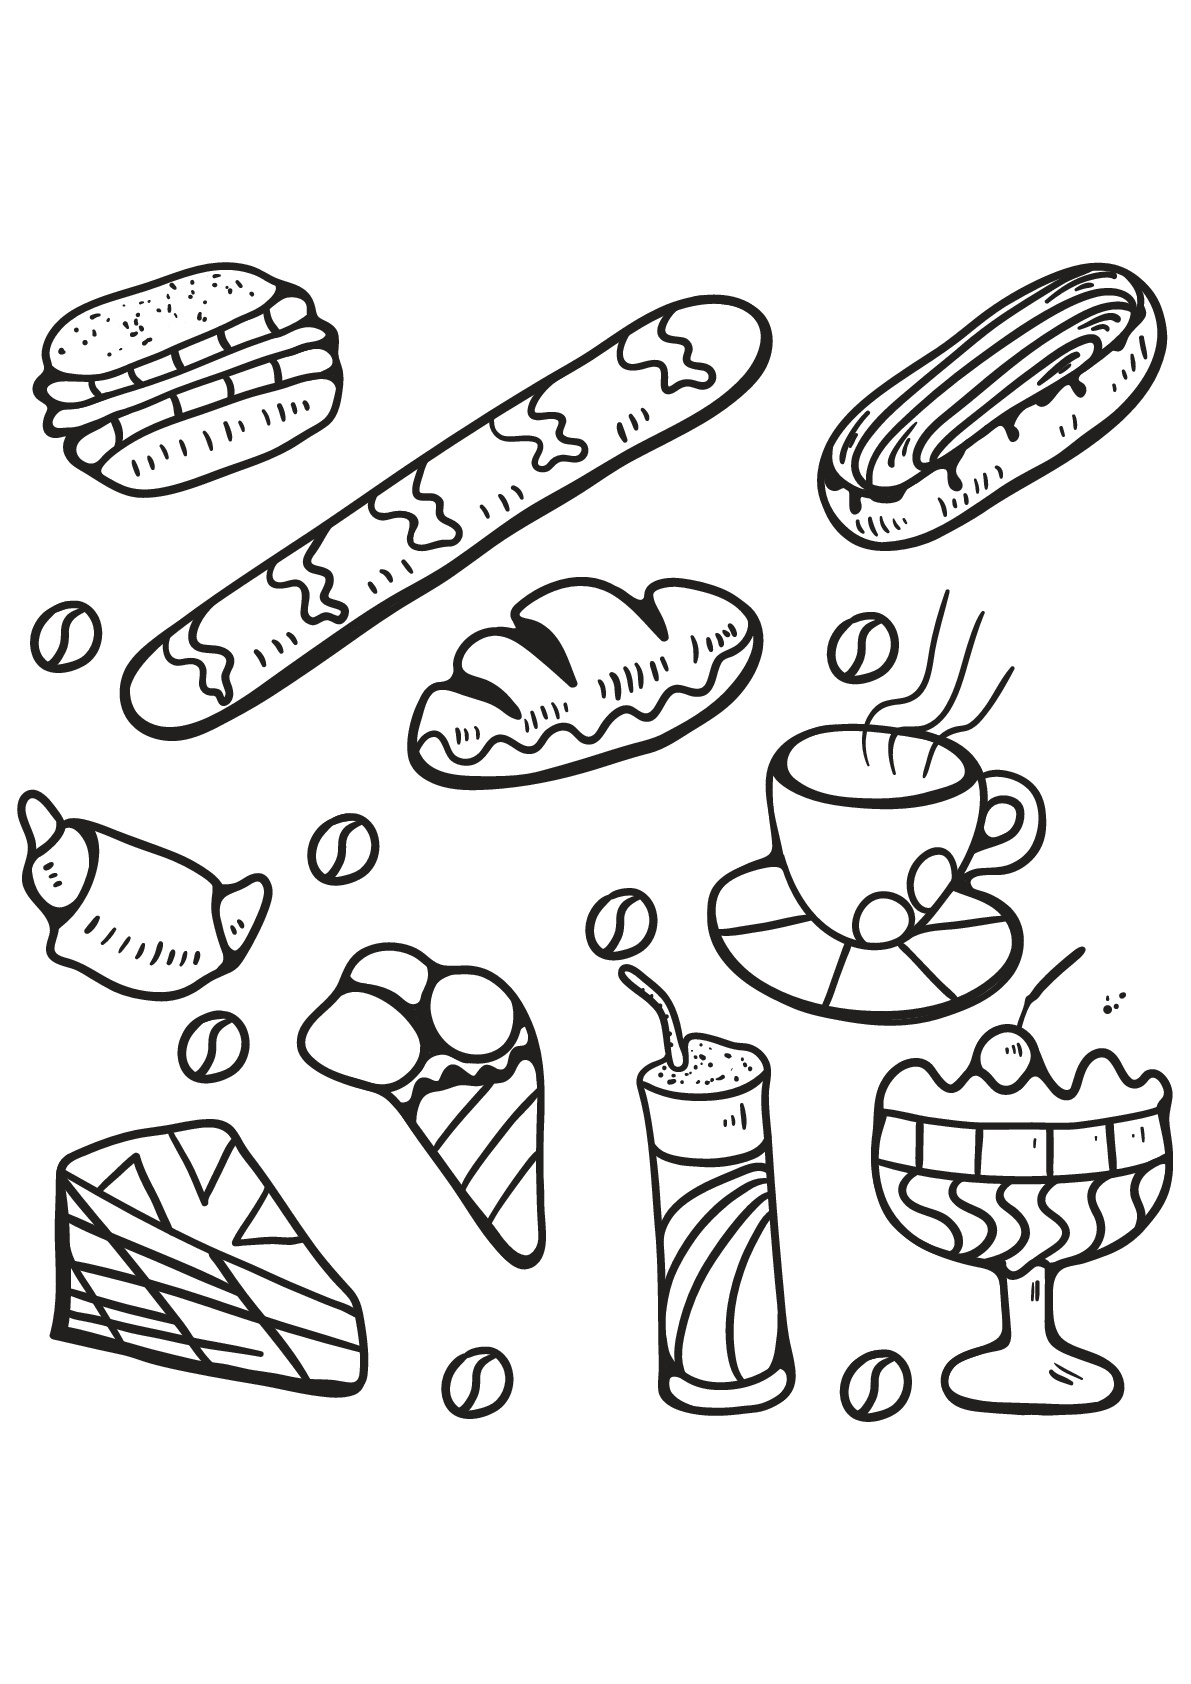 Food - Coloring Pages for Adults